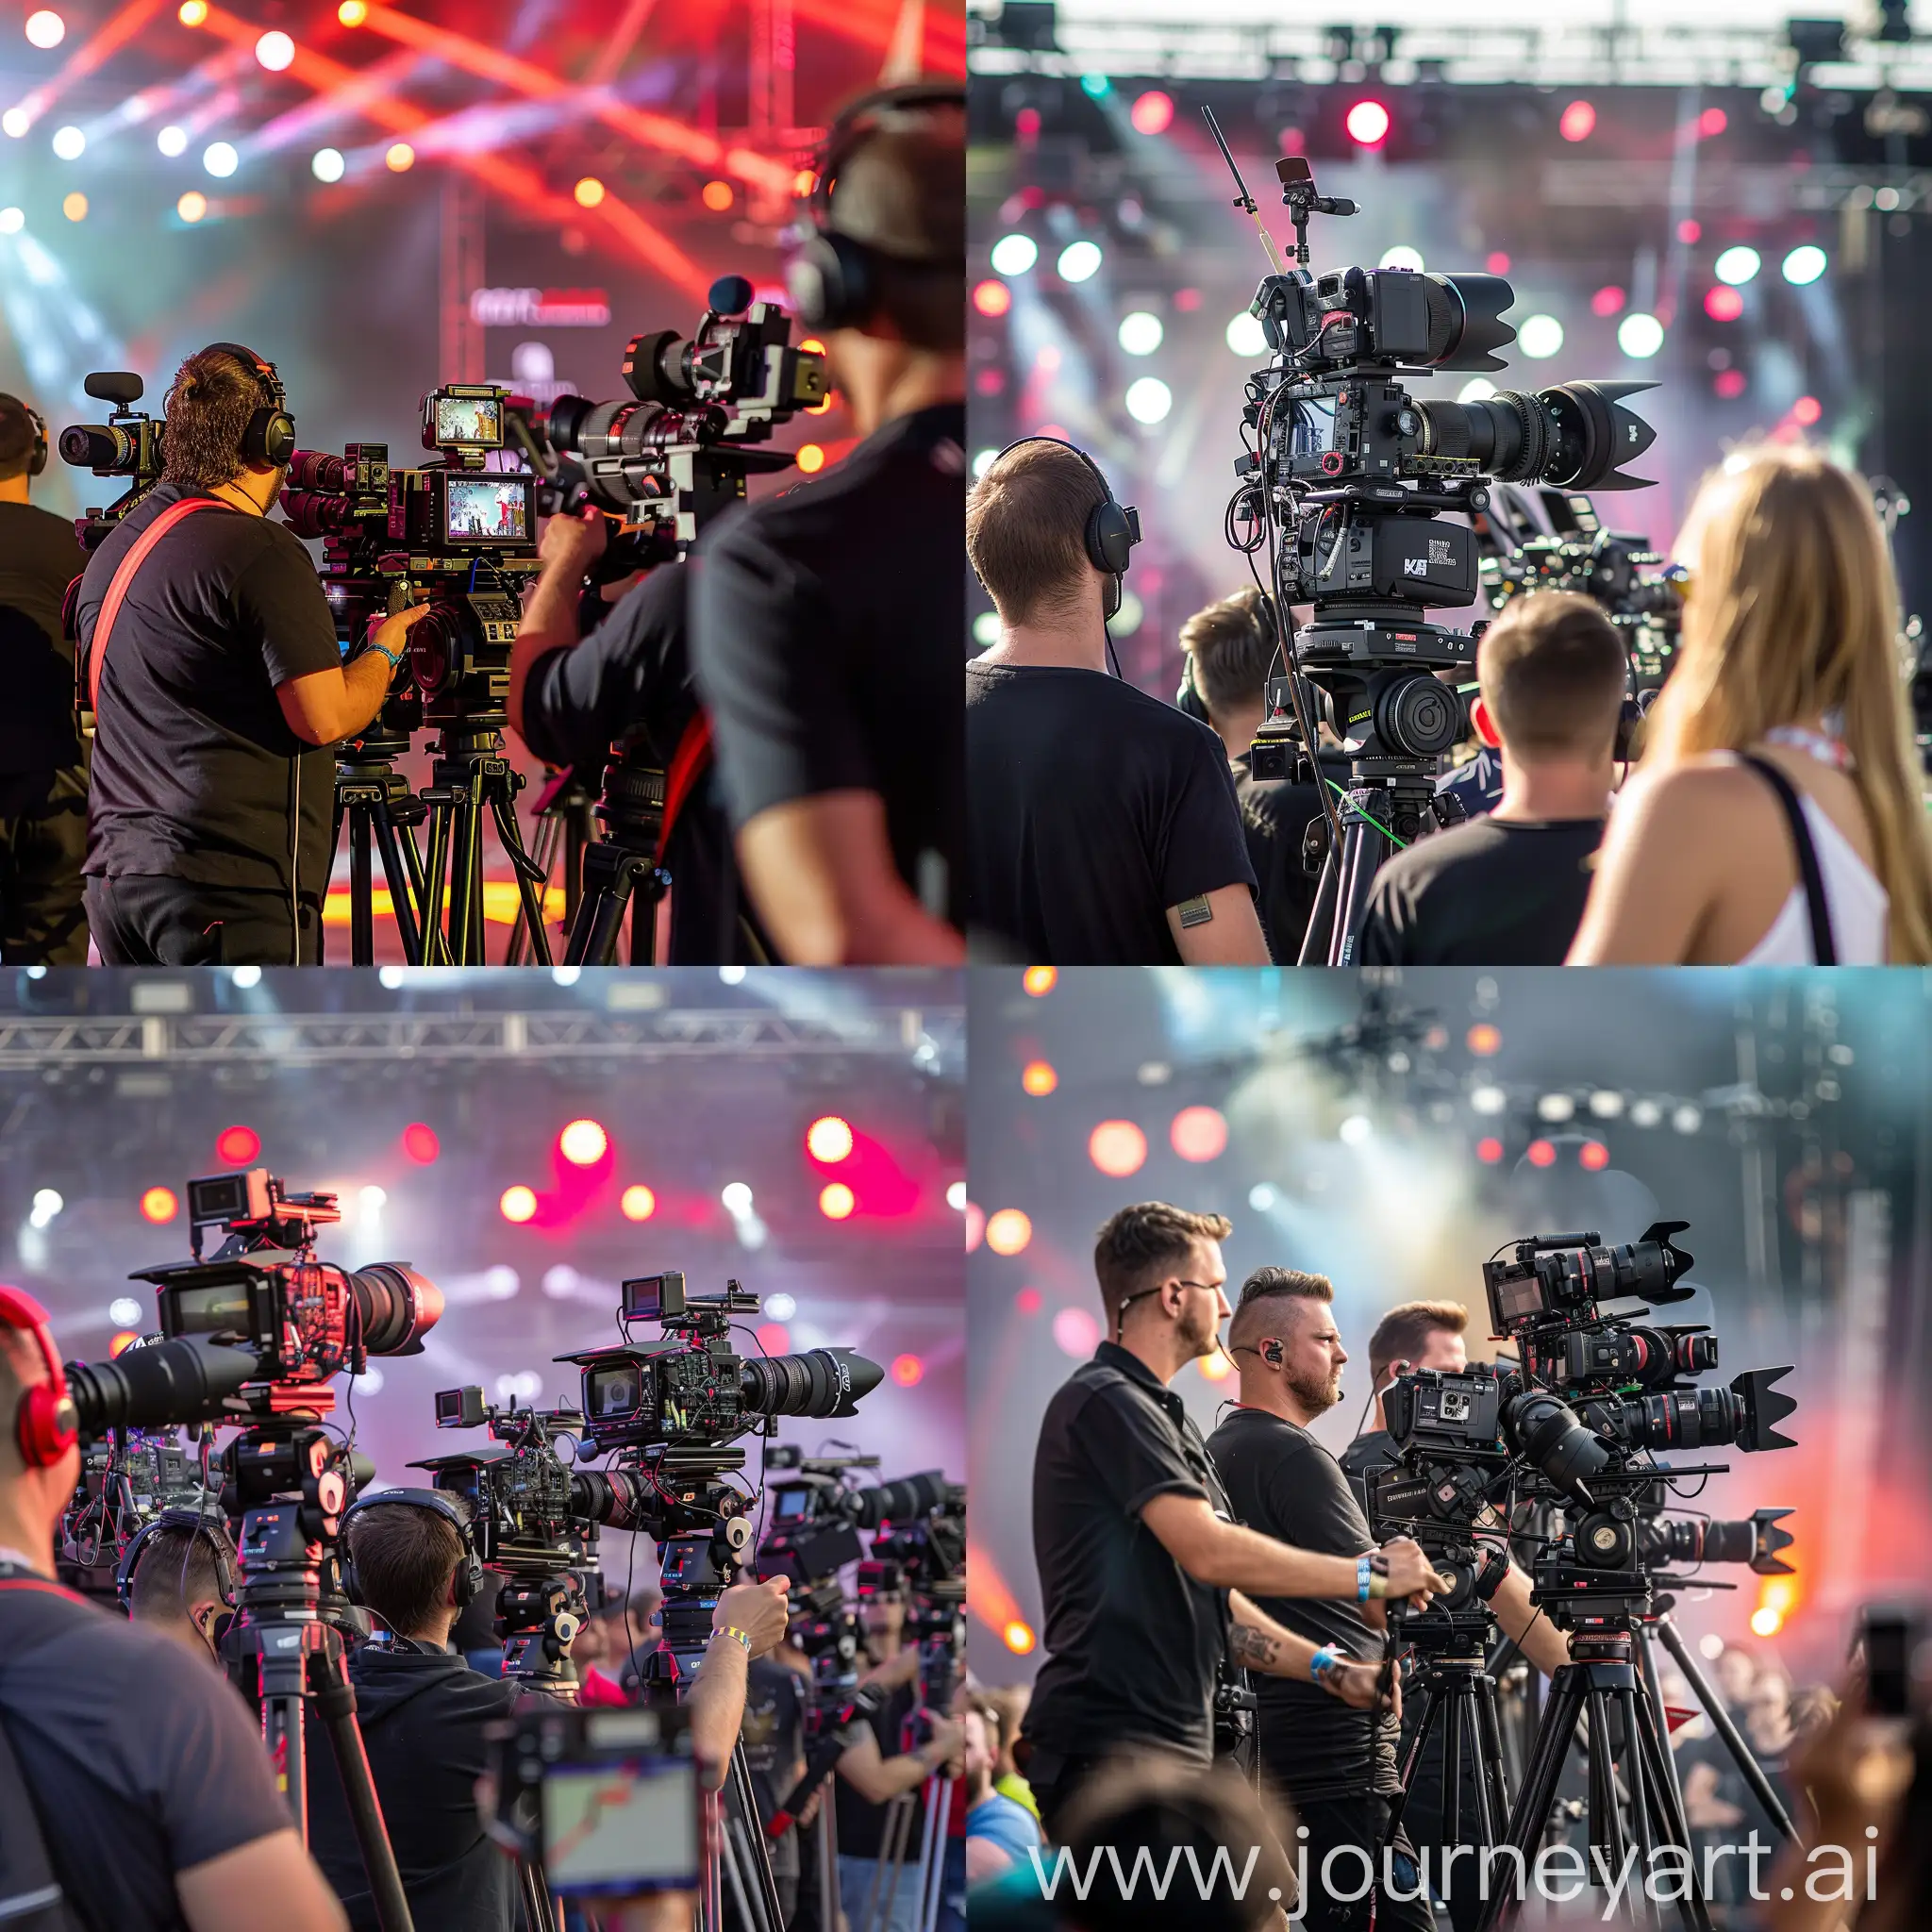 Festival-Concert-Broadcast-Production-Team-with-Cameras